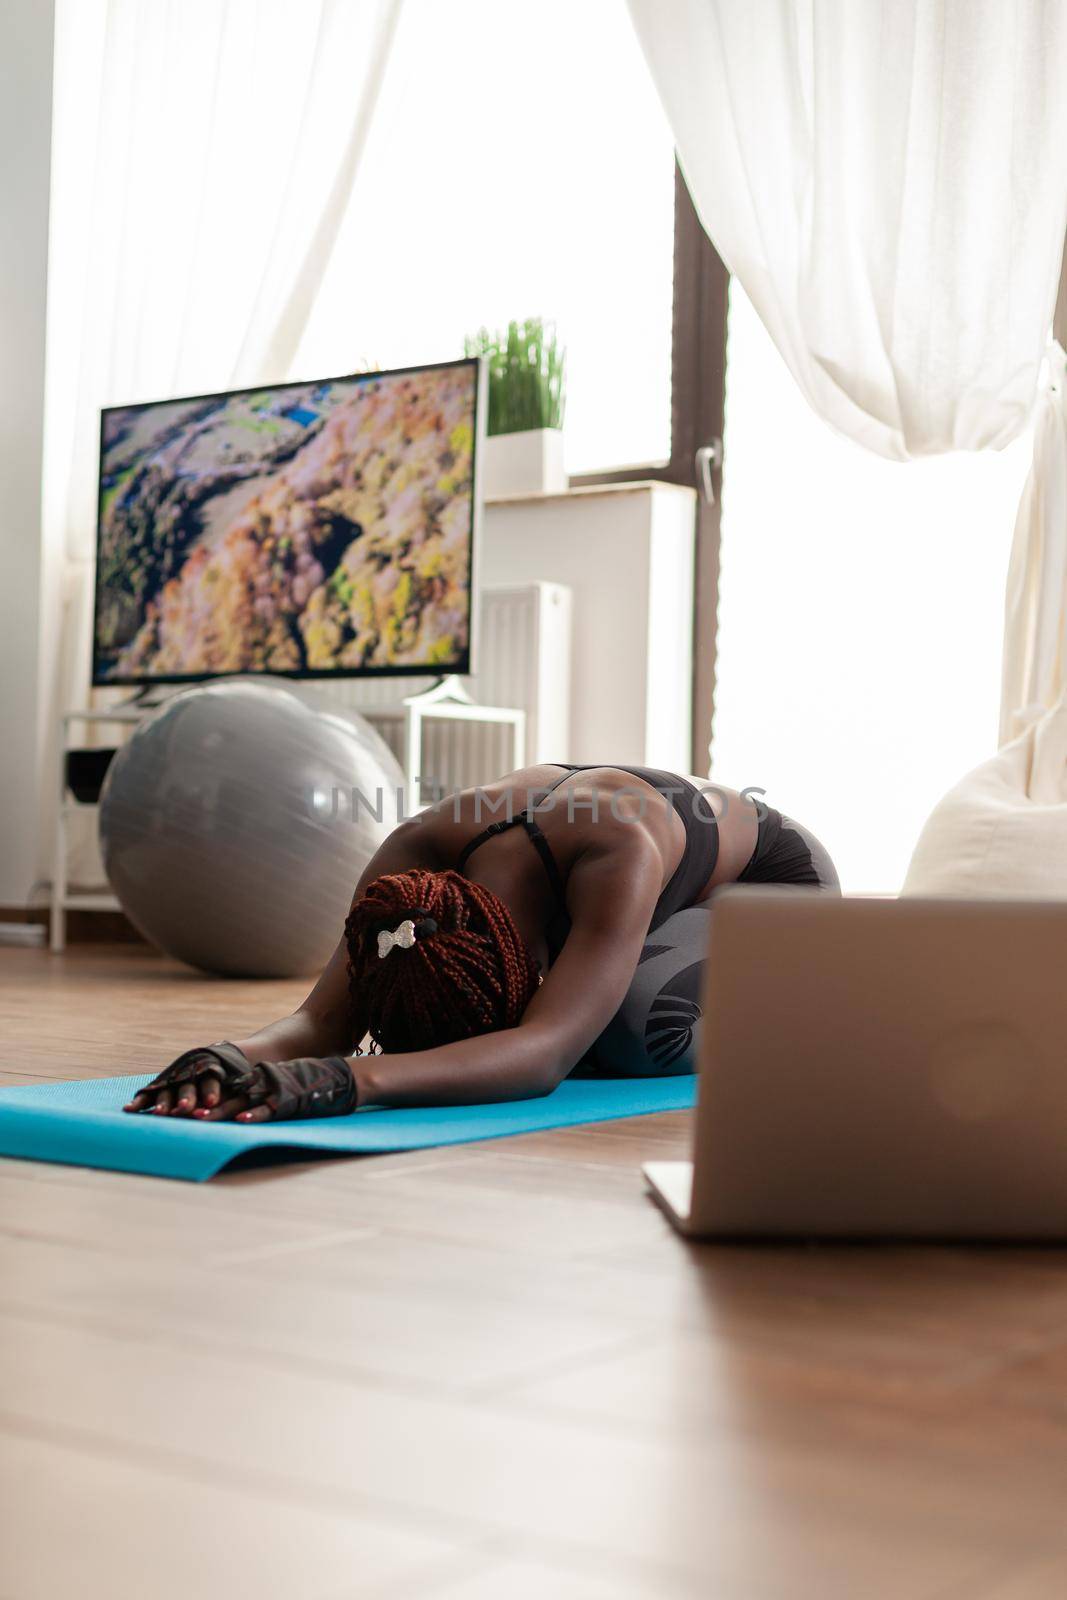 African black fit woman dressed in sportwear relaxing on yoga mat, watching online training exercise using laptop in home living room for wellbeing, Workout and healthy lifestyle.